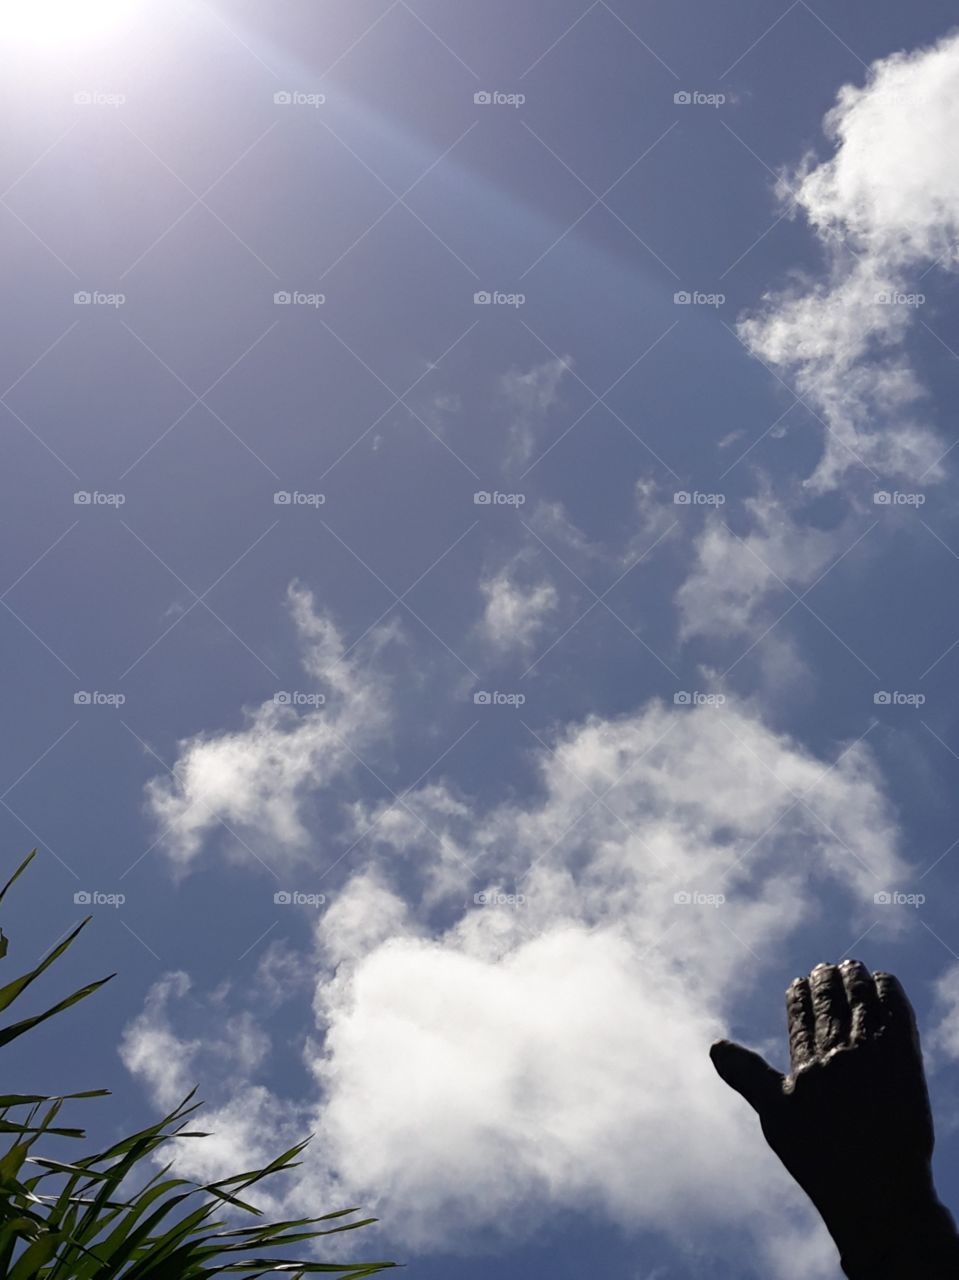 touching the sky